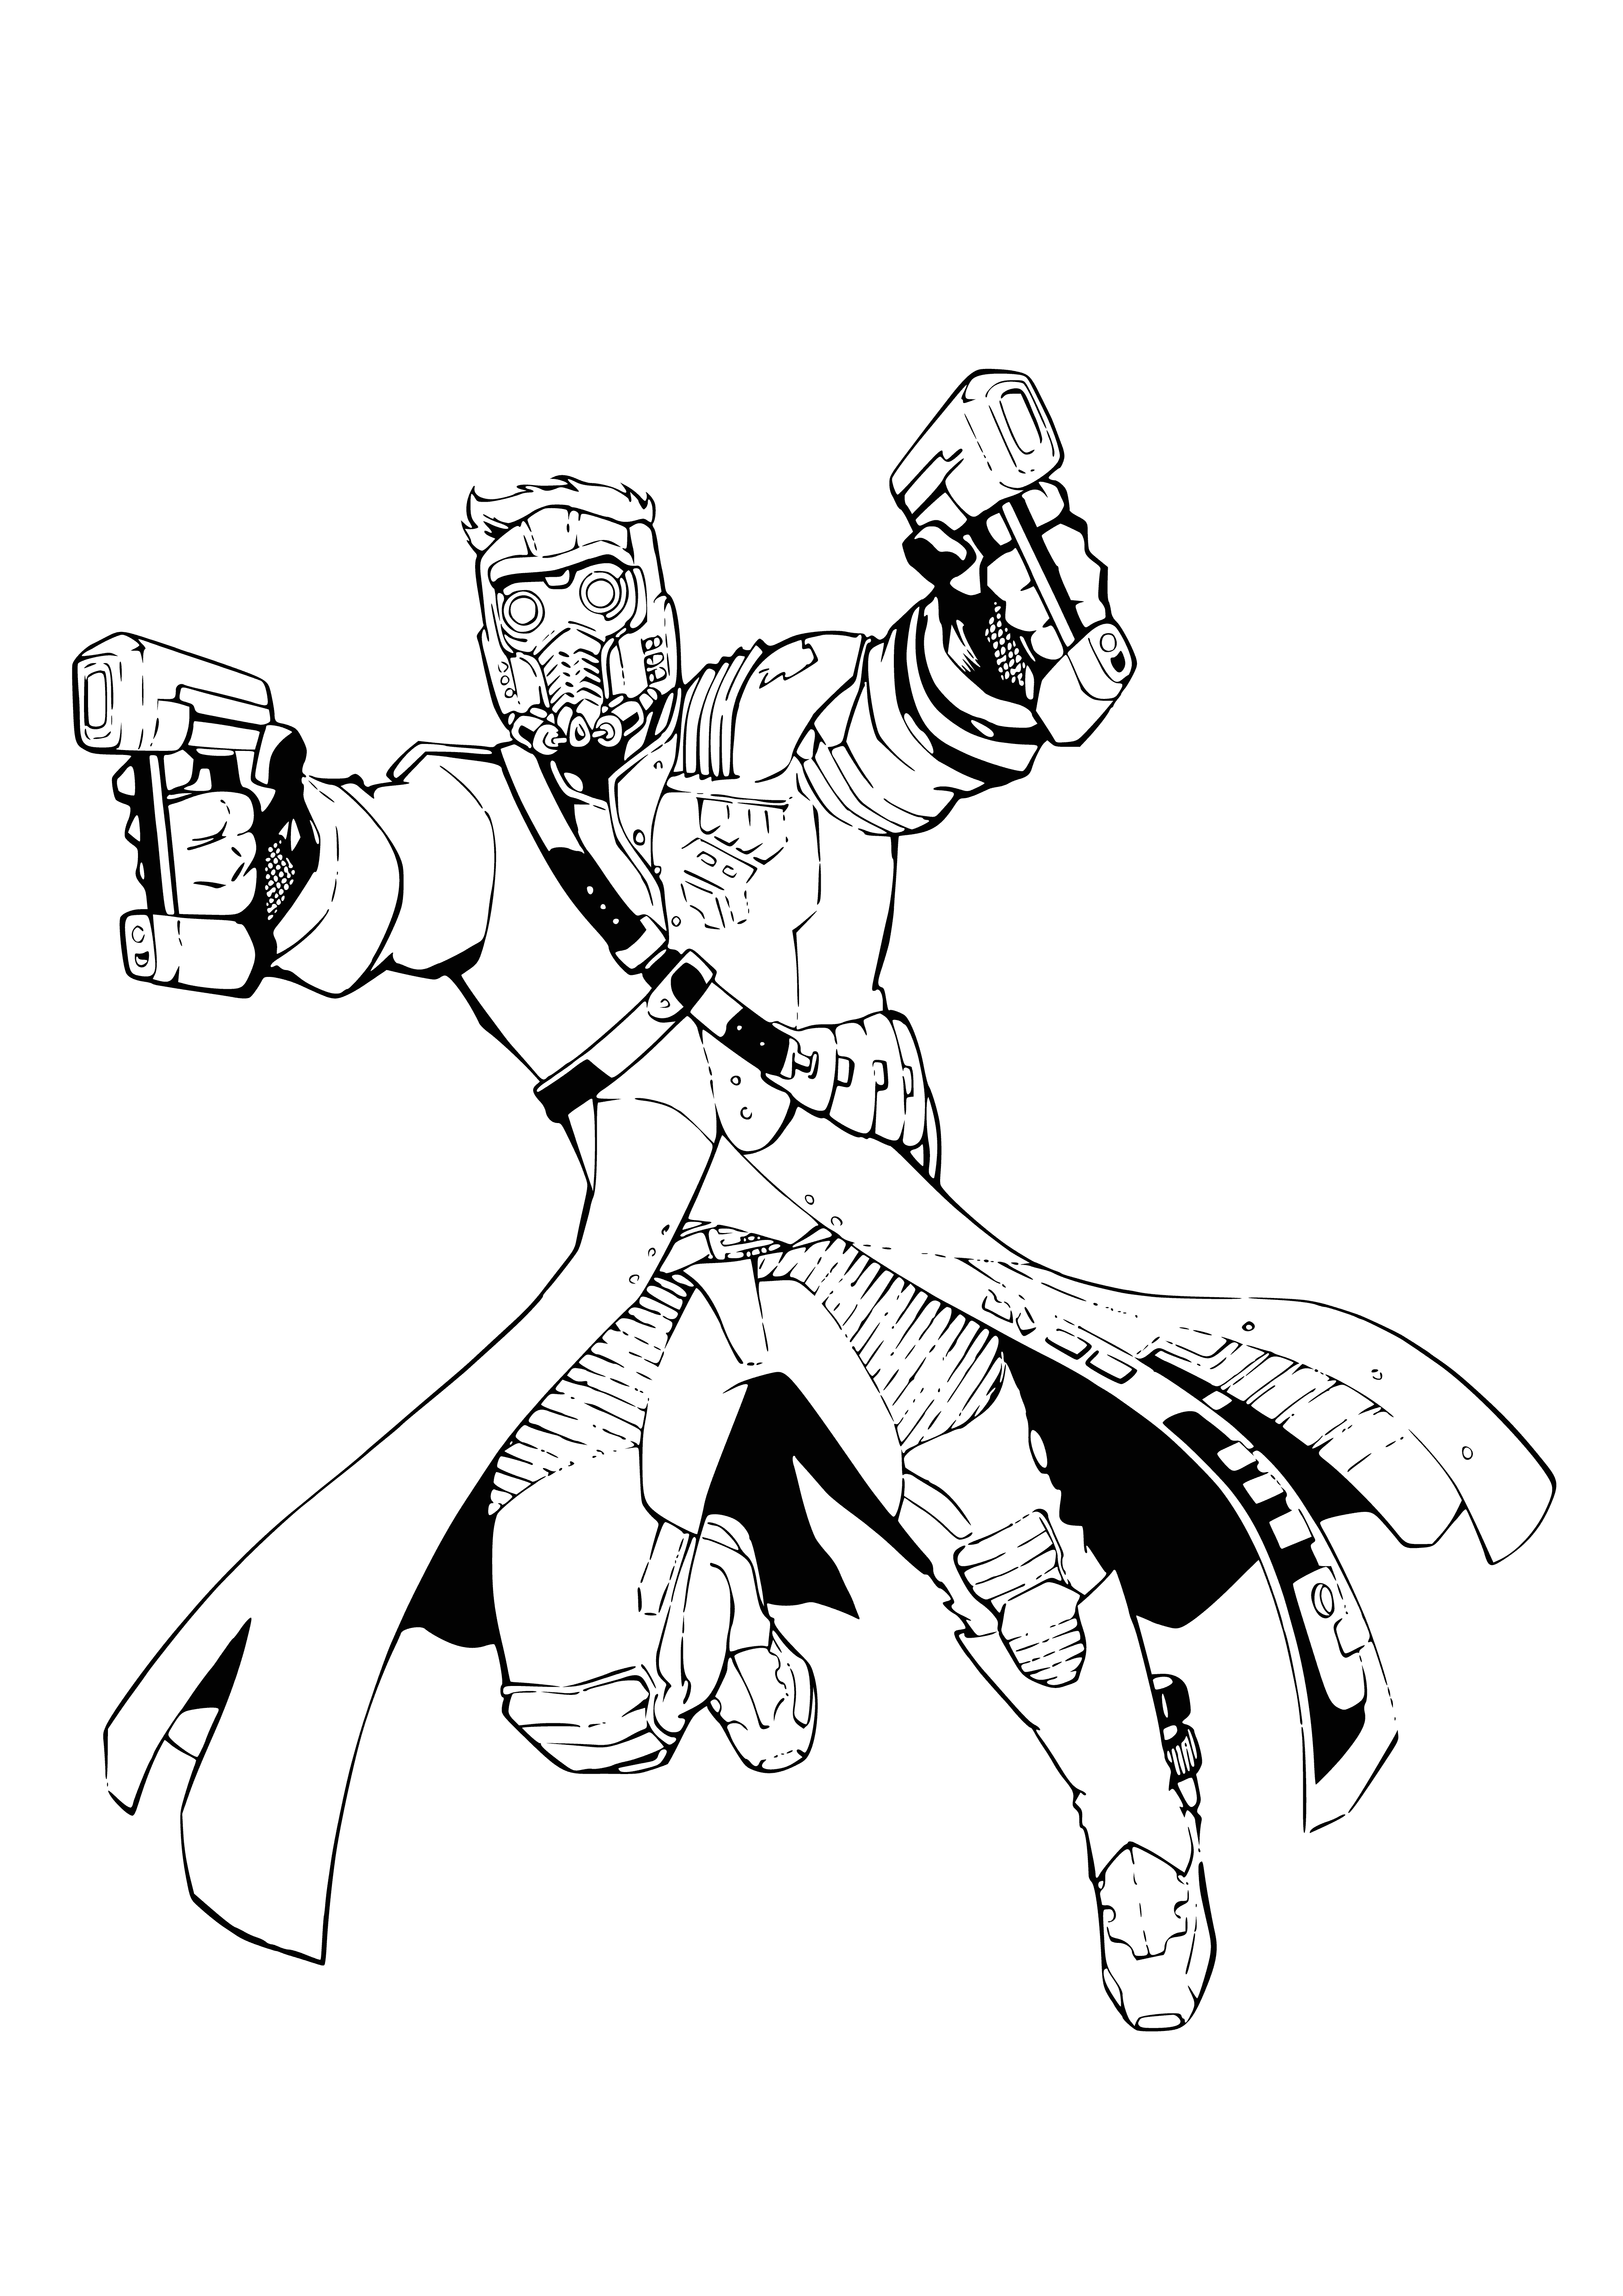 coloring page: Man floats in space w/meteor behind him, wearing dark & red suit & long red cape, holding a black blaster & red mask conceals eyes.